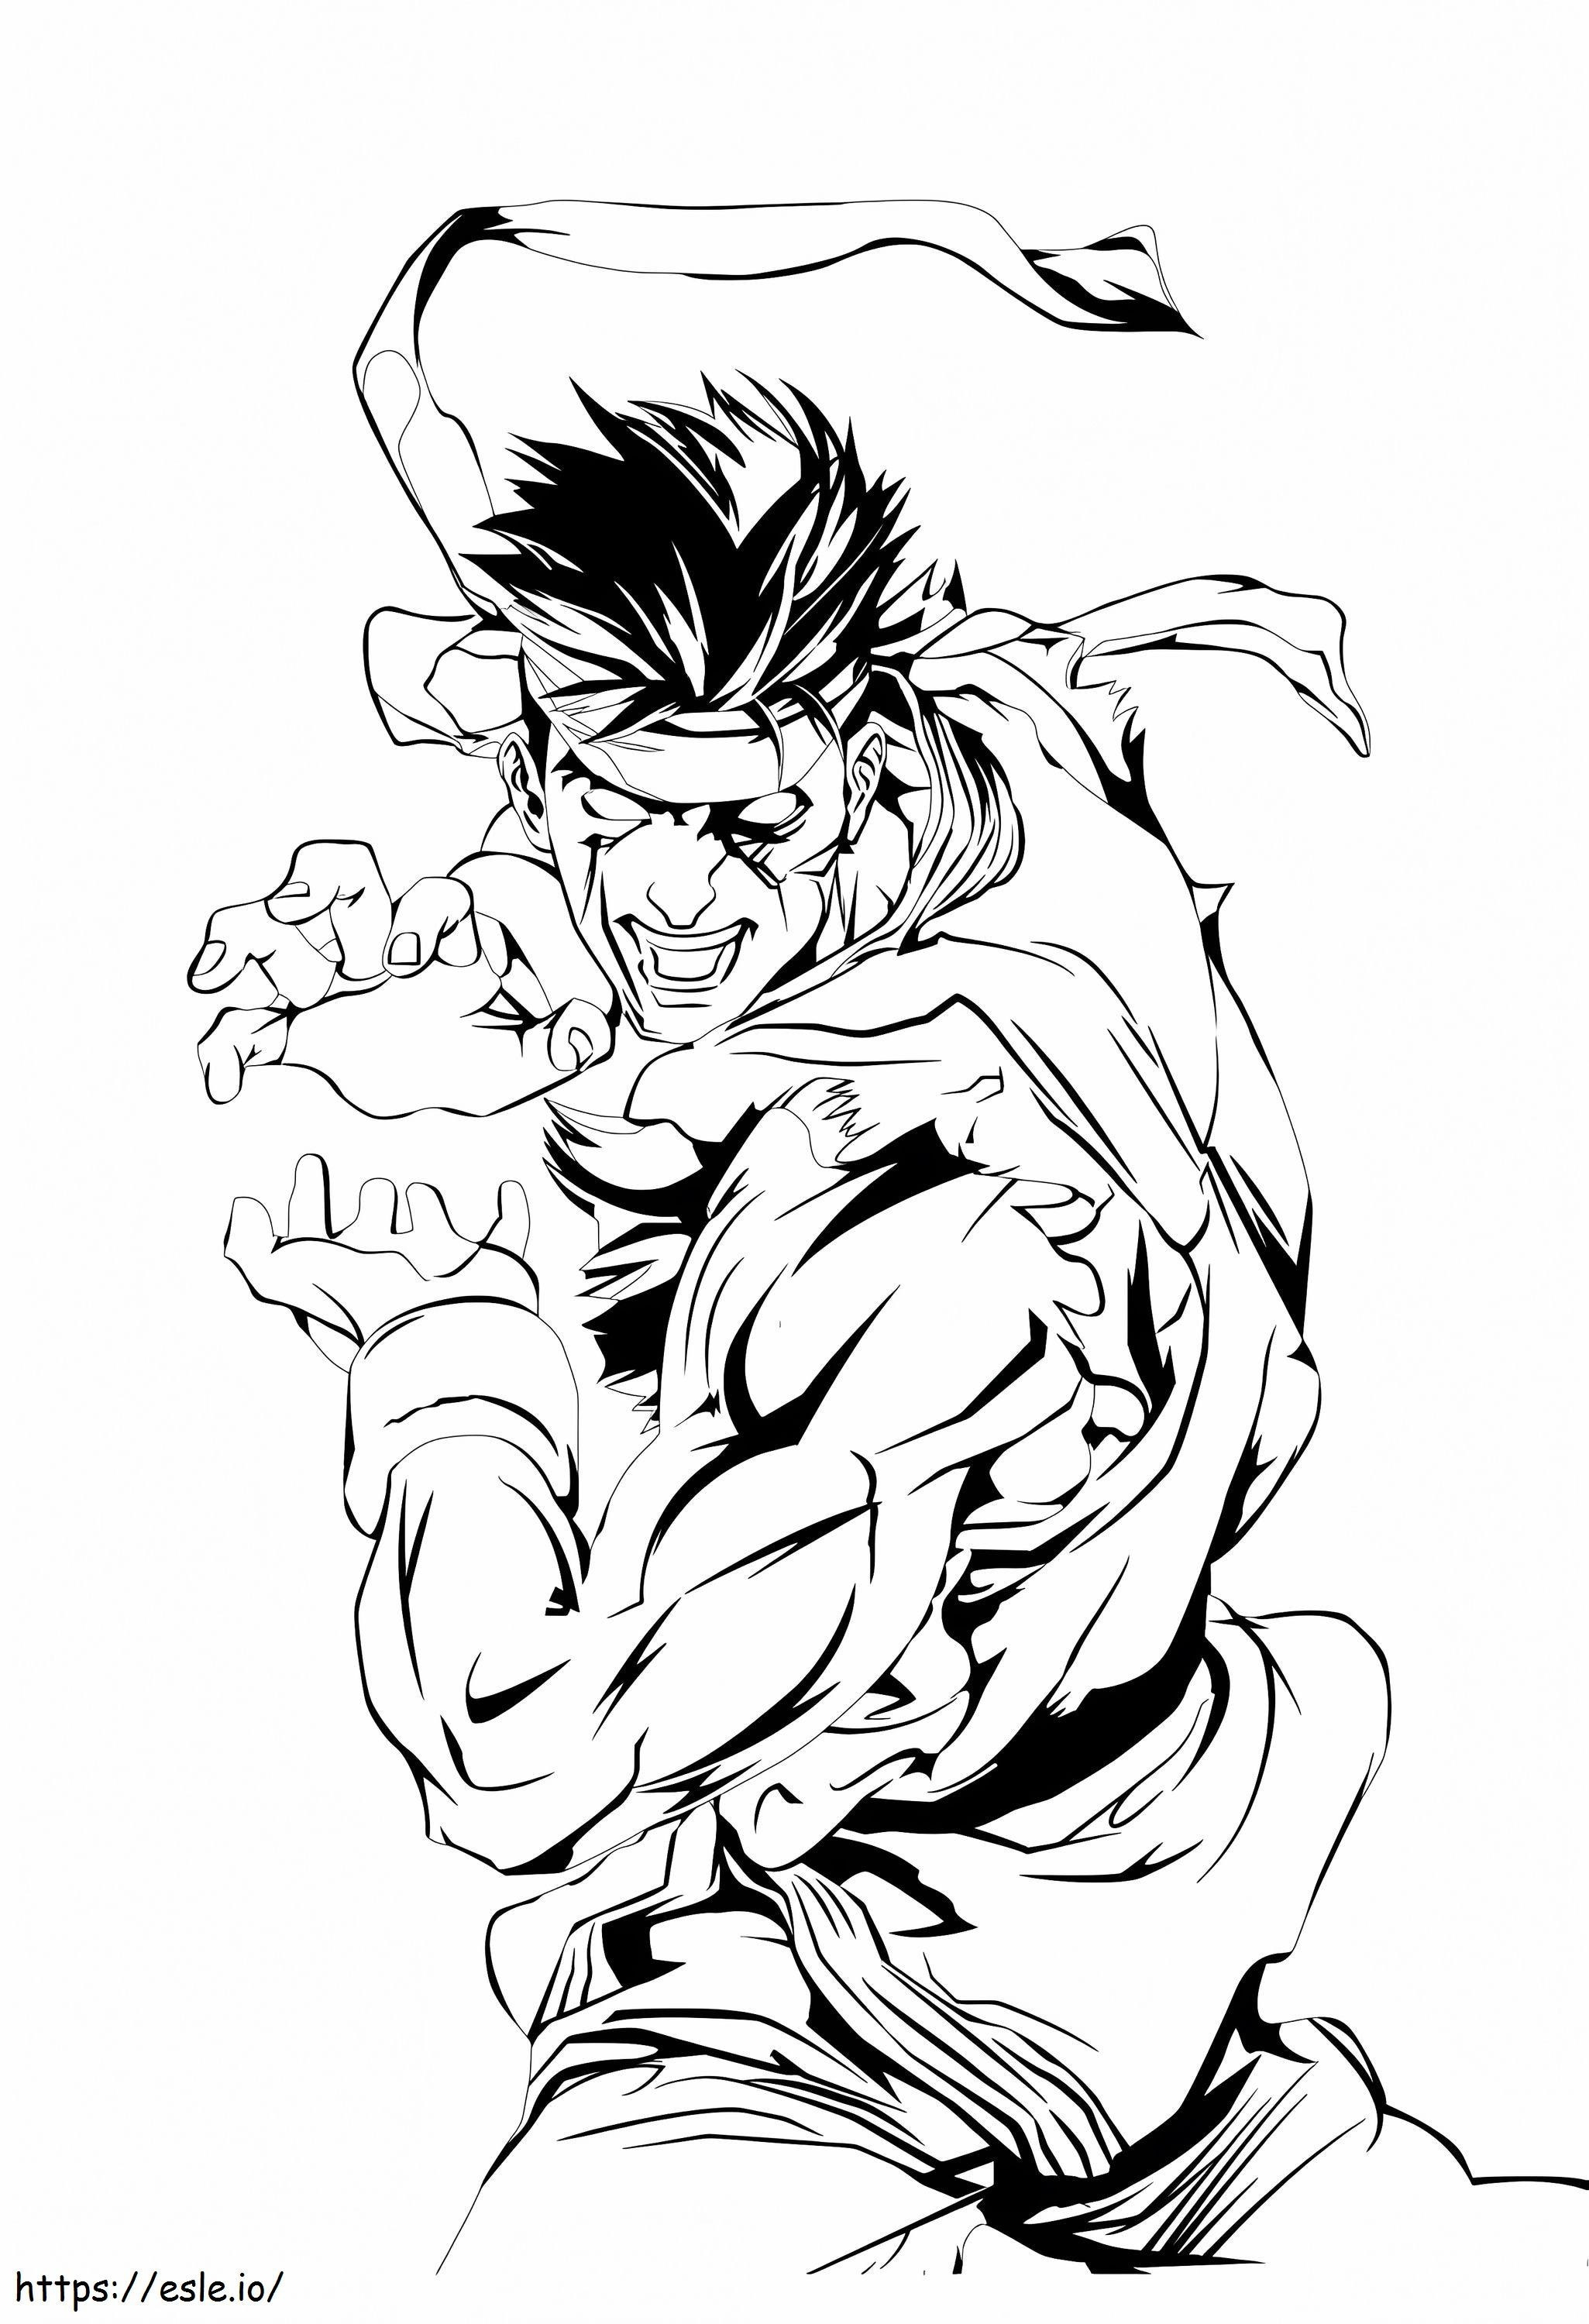 Evil Ryu coloring page